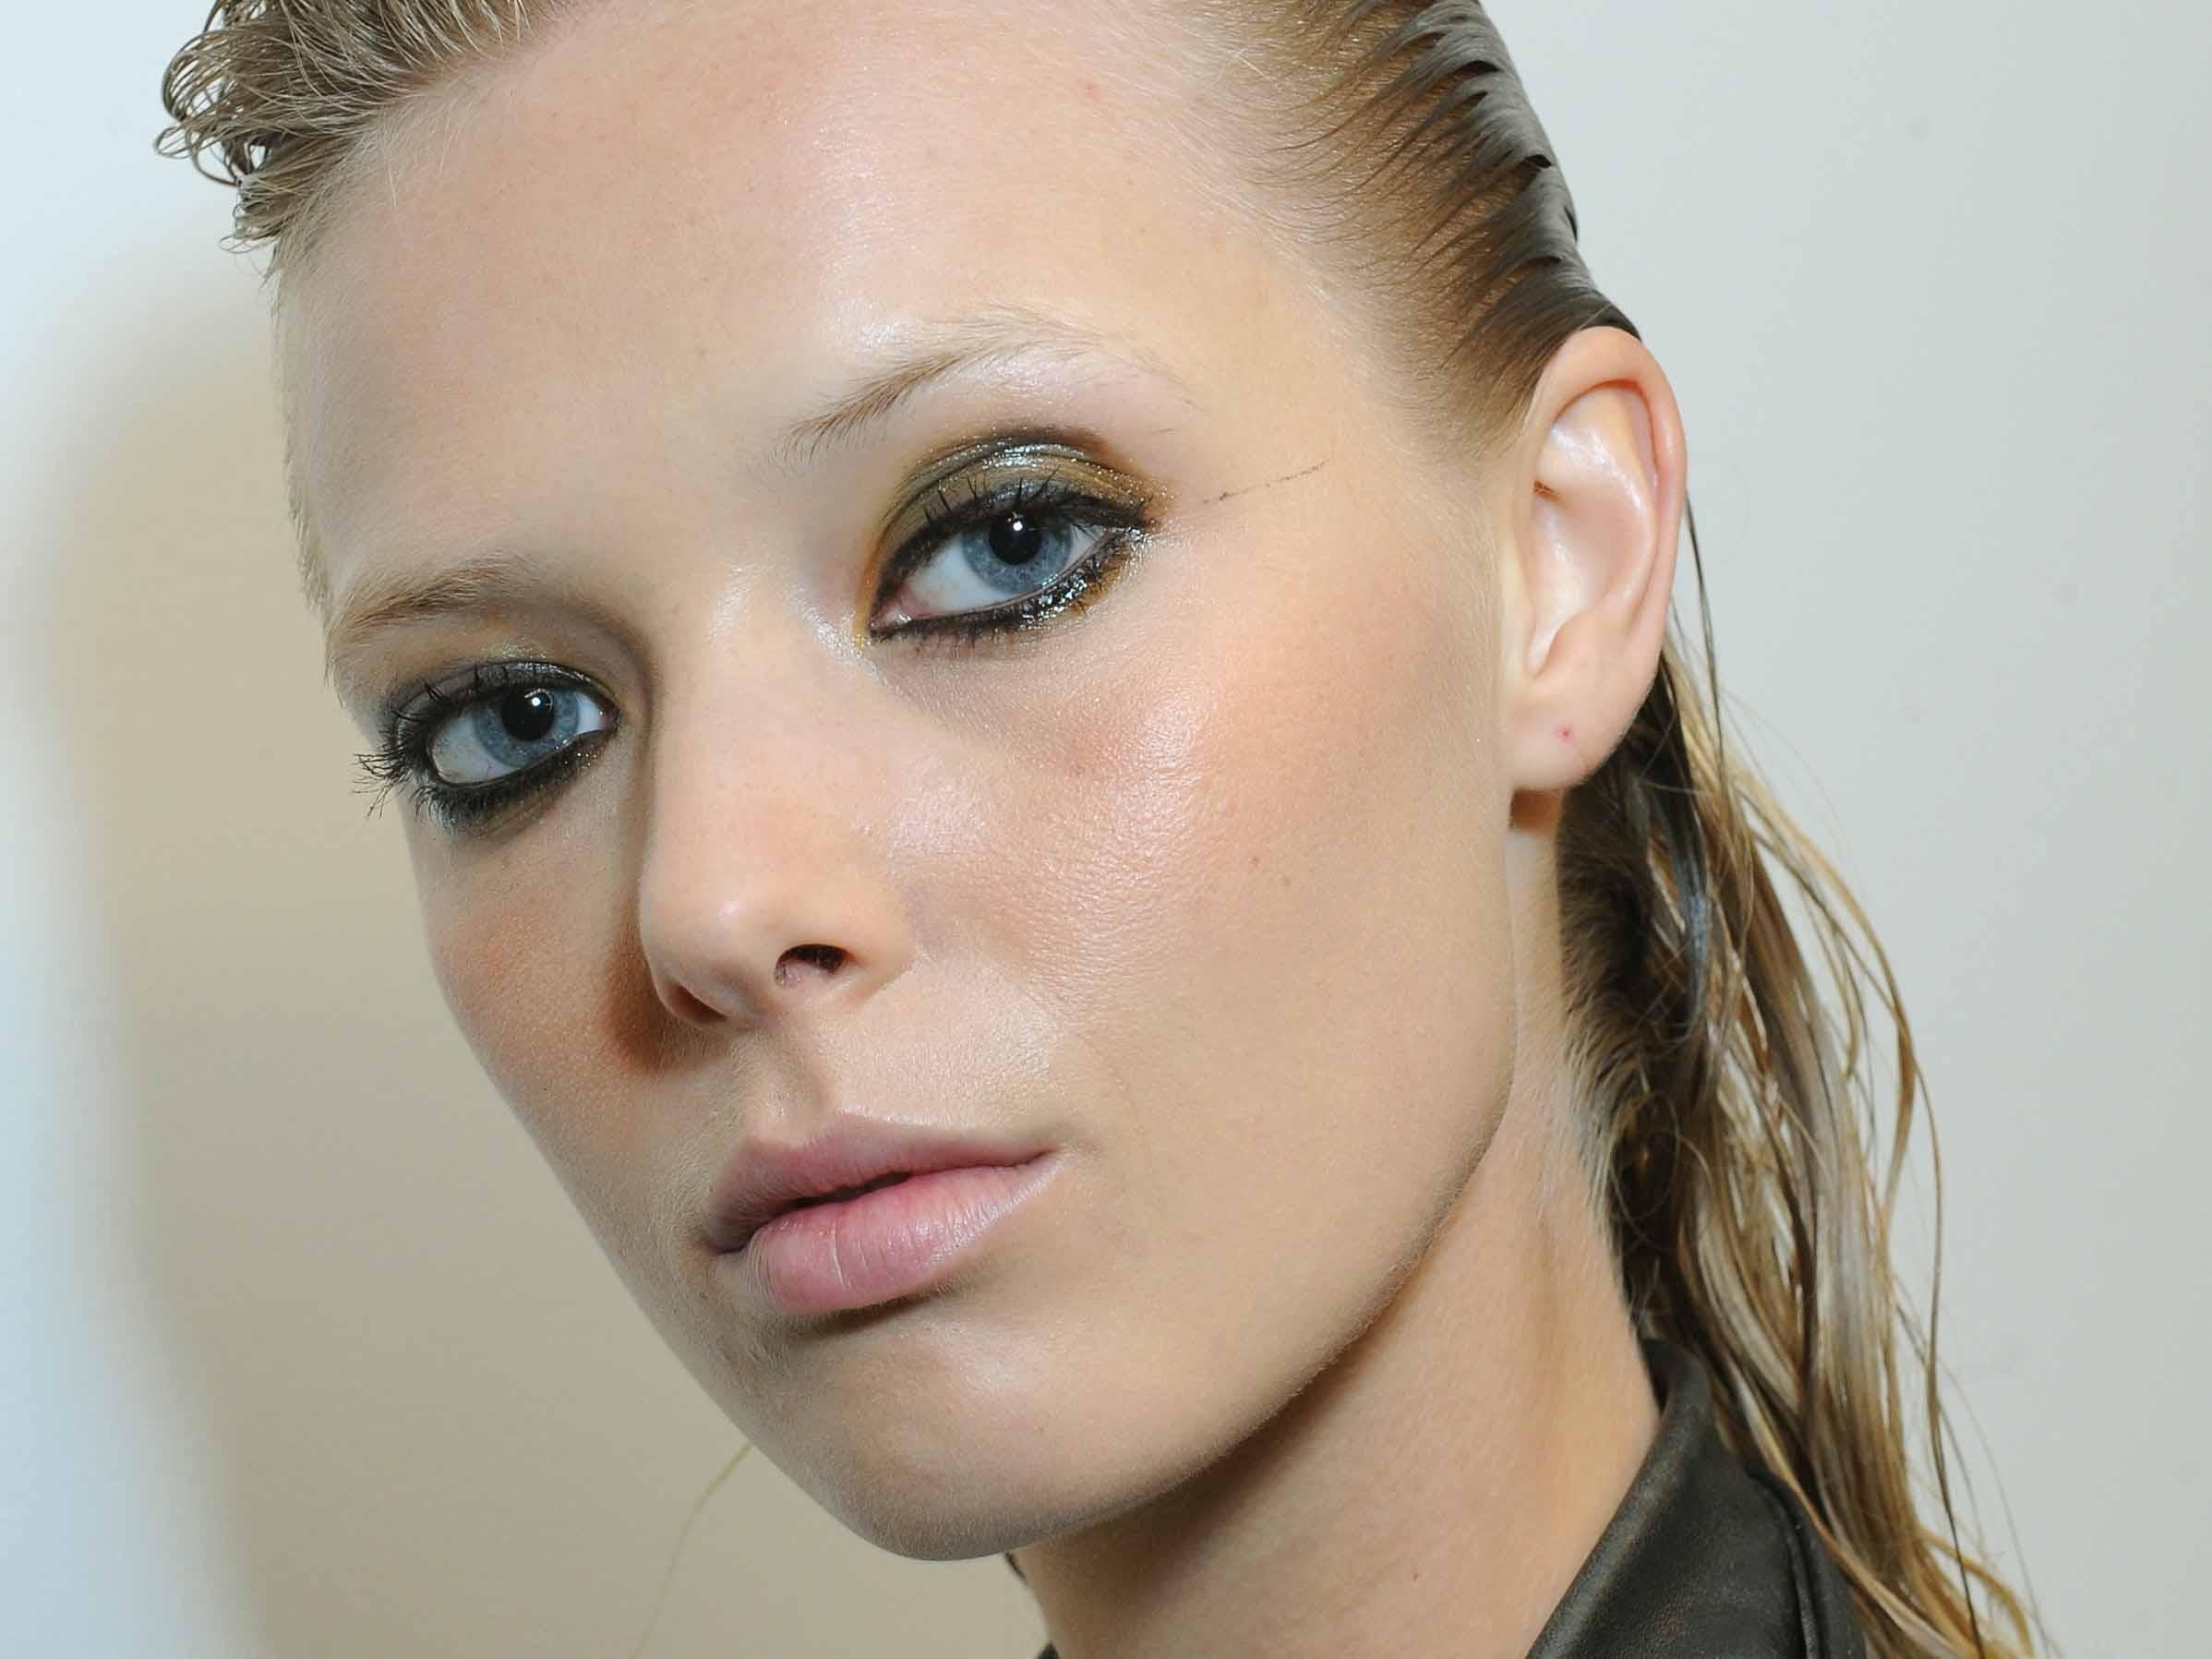 Greasy lids serve up a fine line between perfectly polished and downright grungy - Altuzarra SS17